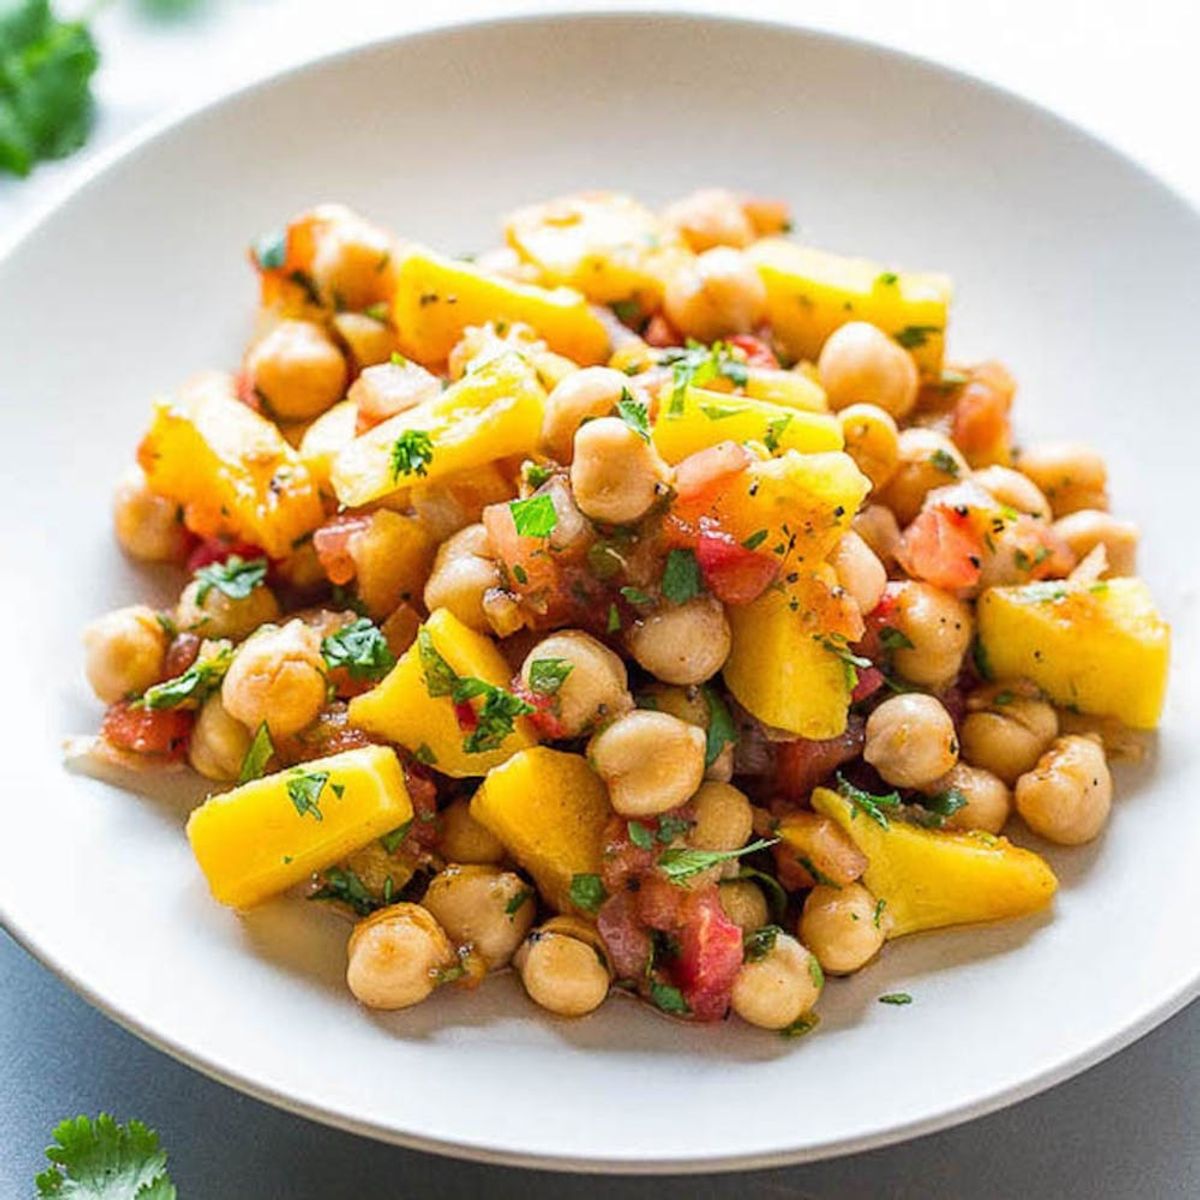 18 Chickpea Recipes That Go WAY Beyond Hummus